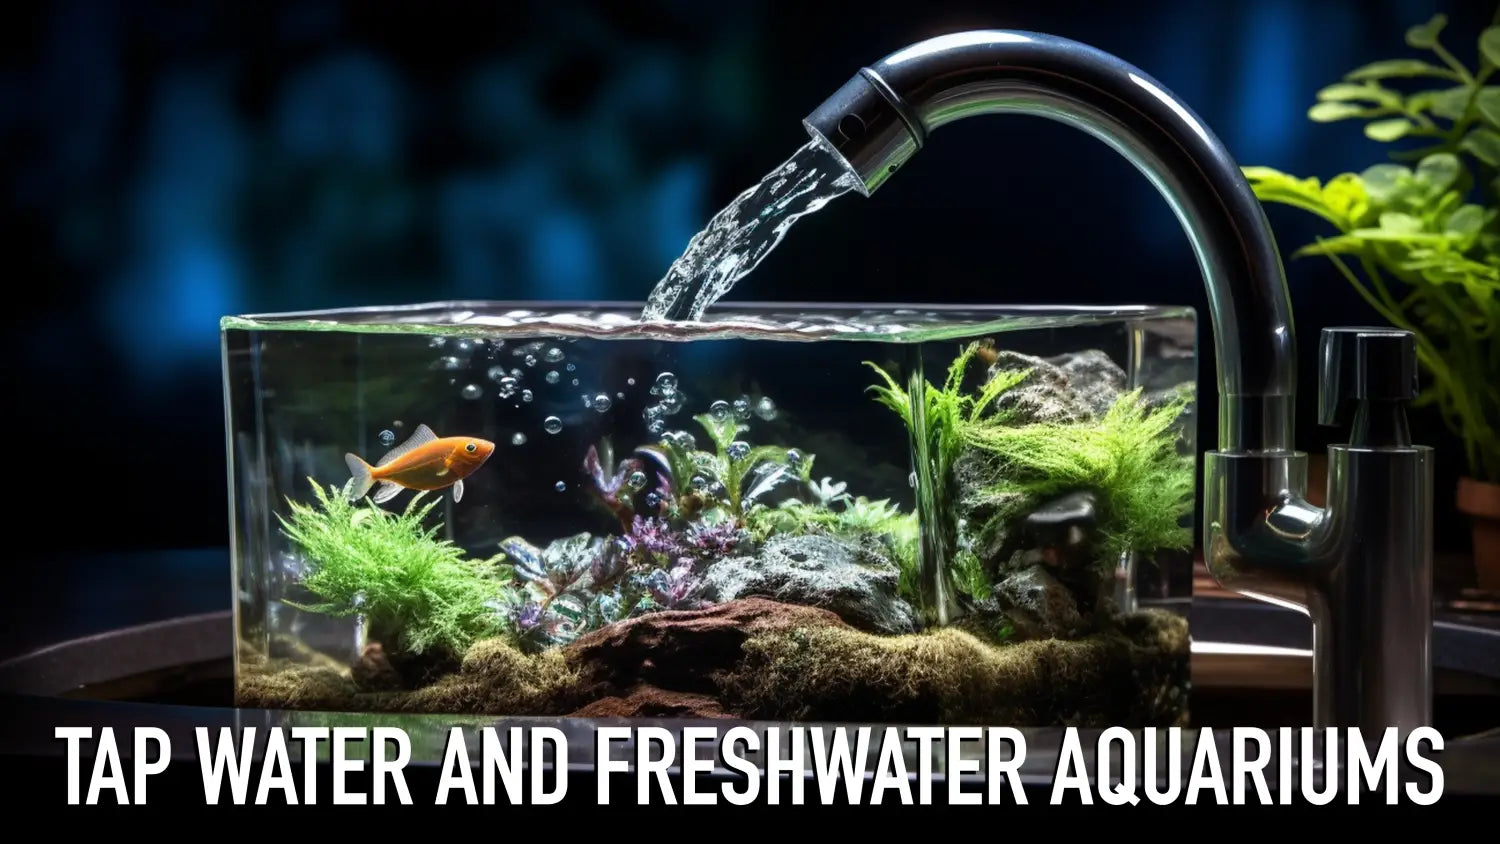 Tap Water and Freshwater Aquariums: The Comprehensive Guide to the Water Chemistry of Tap Water in the United States